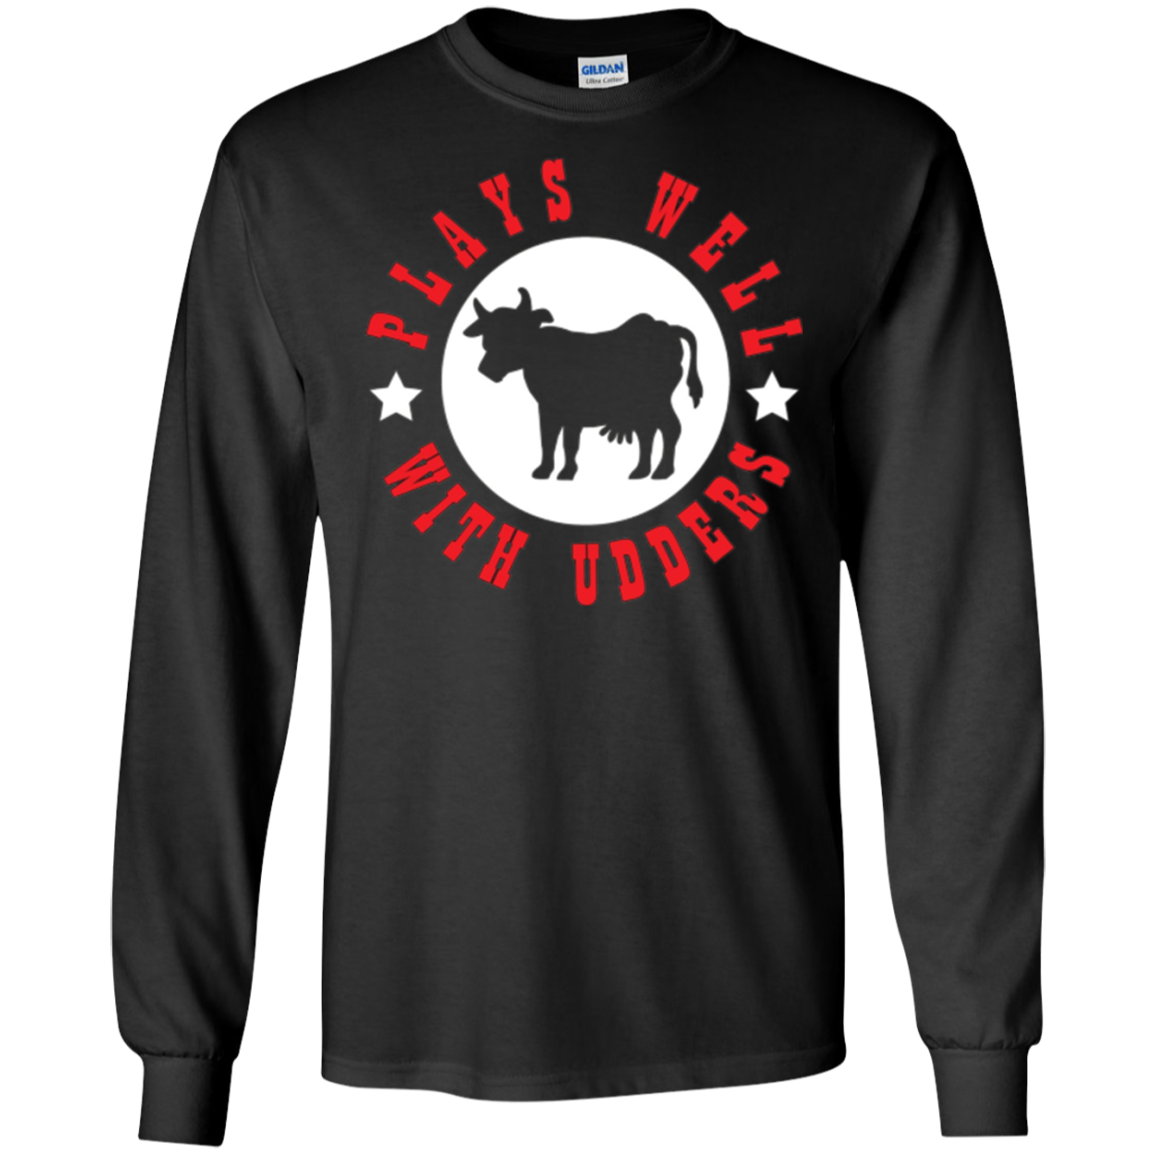 Funny Farmer Shirt: Plays Well With Udders. Cow Farm T-shirt